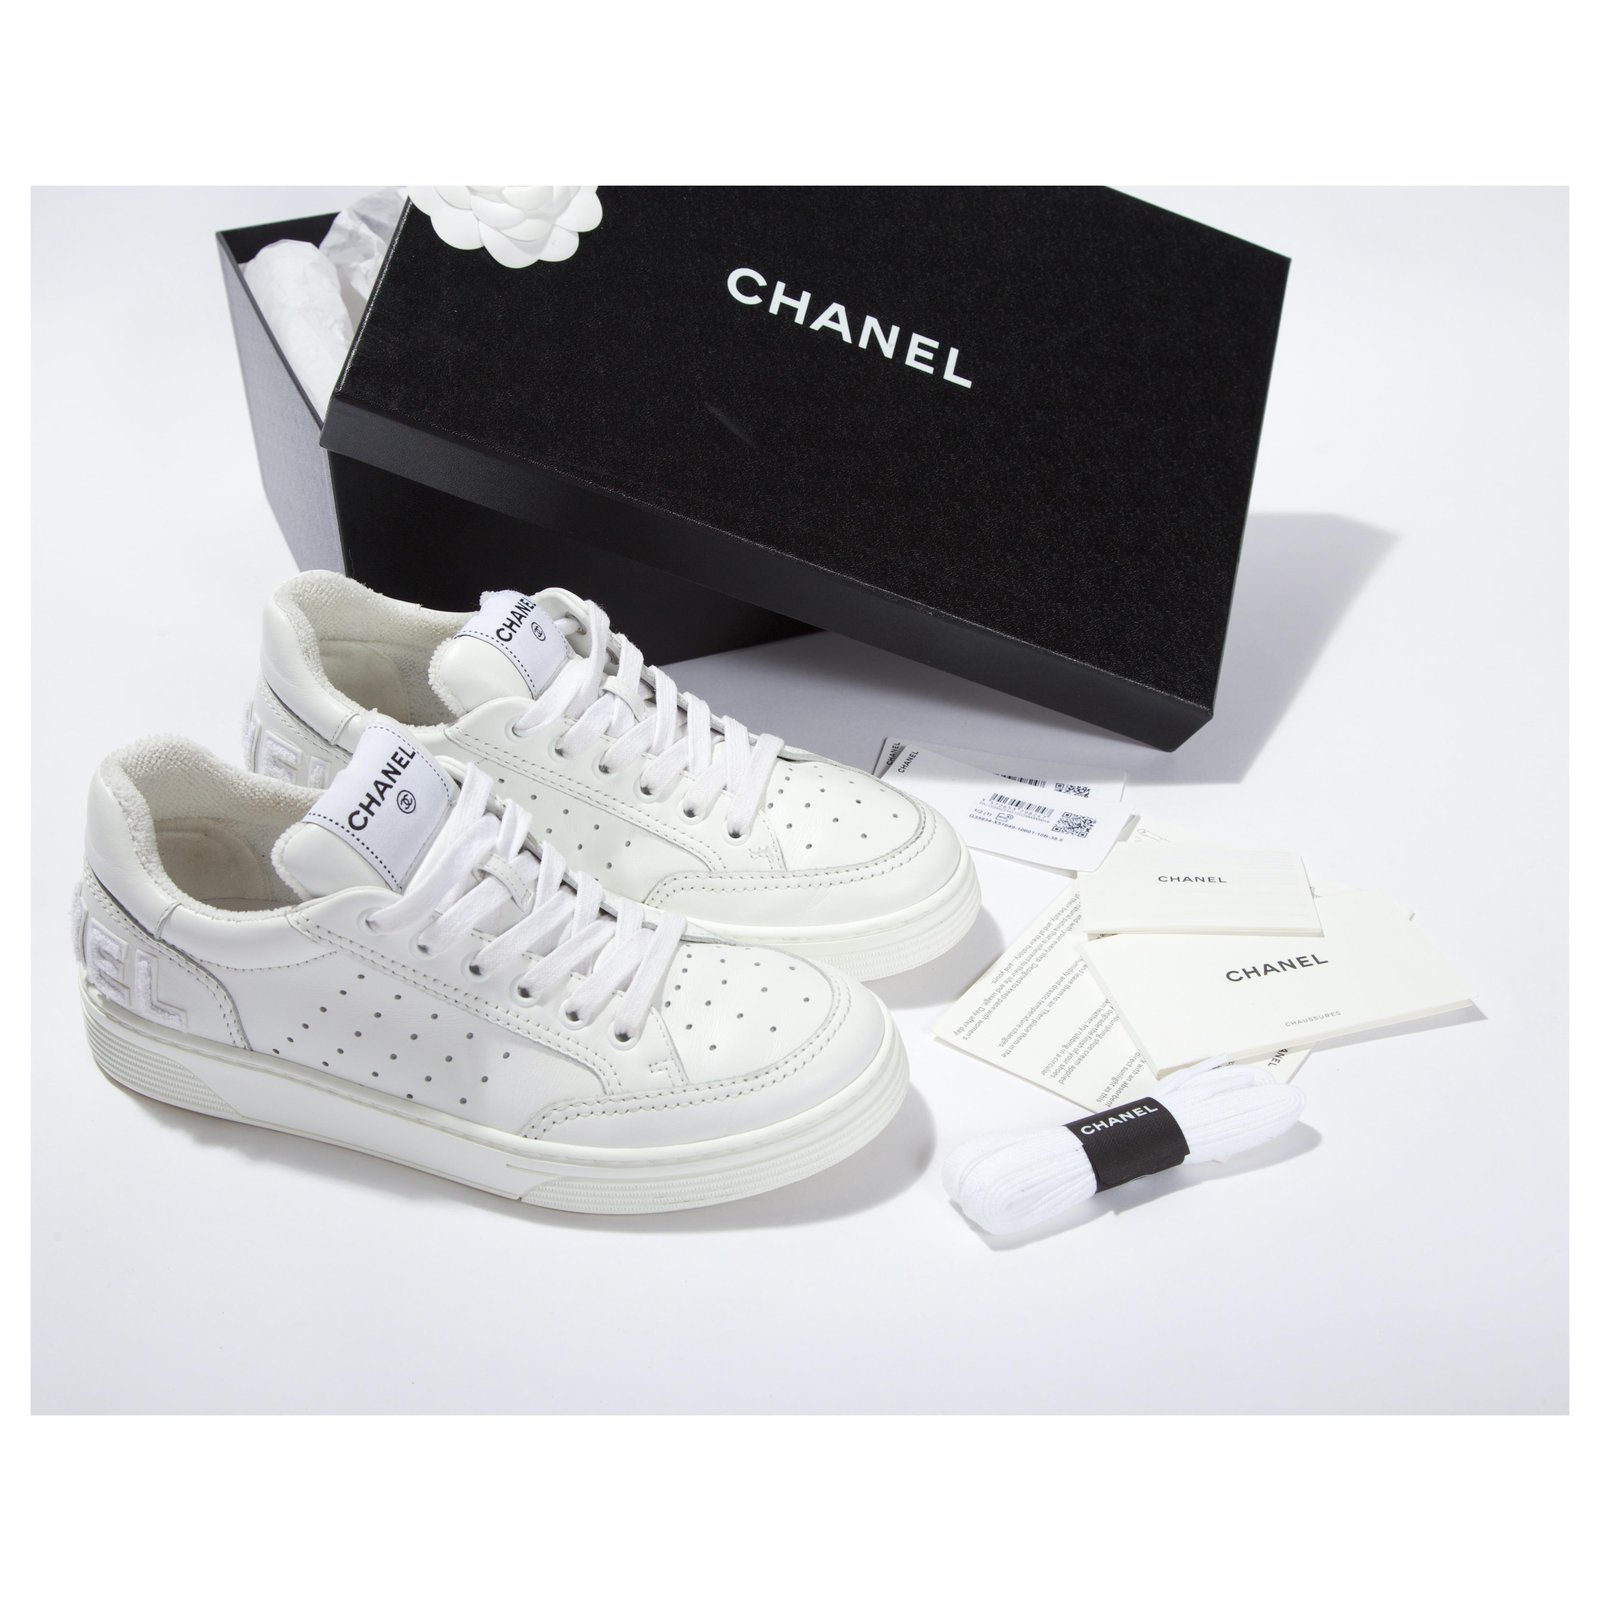 Chanel Shoe Size 46 Box Incl Black & White Leather Logo Lace-Up Trainer Sneakers